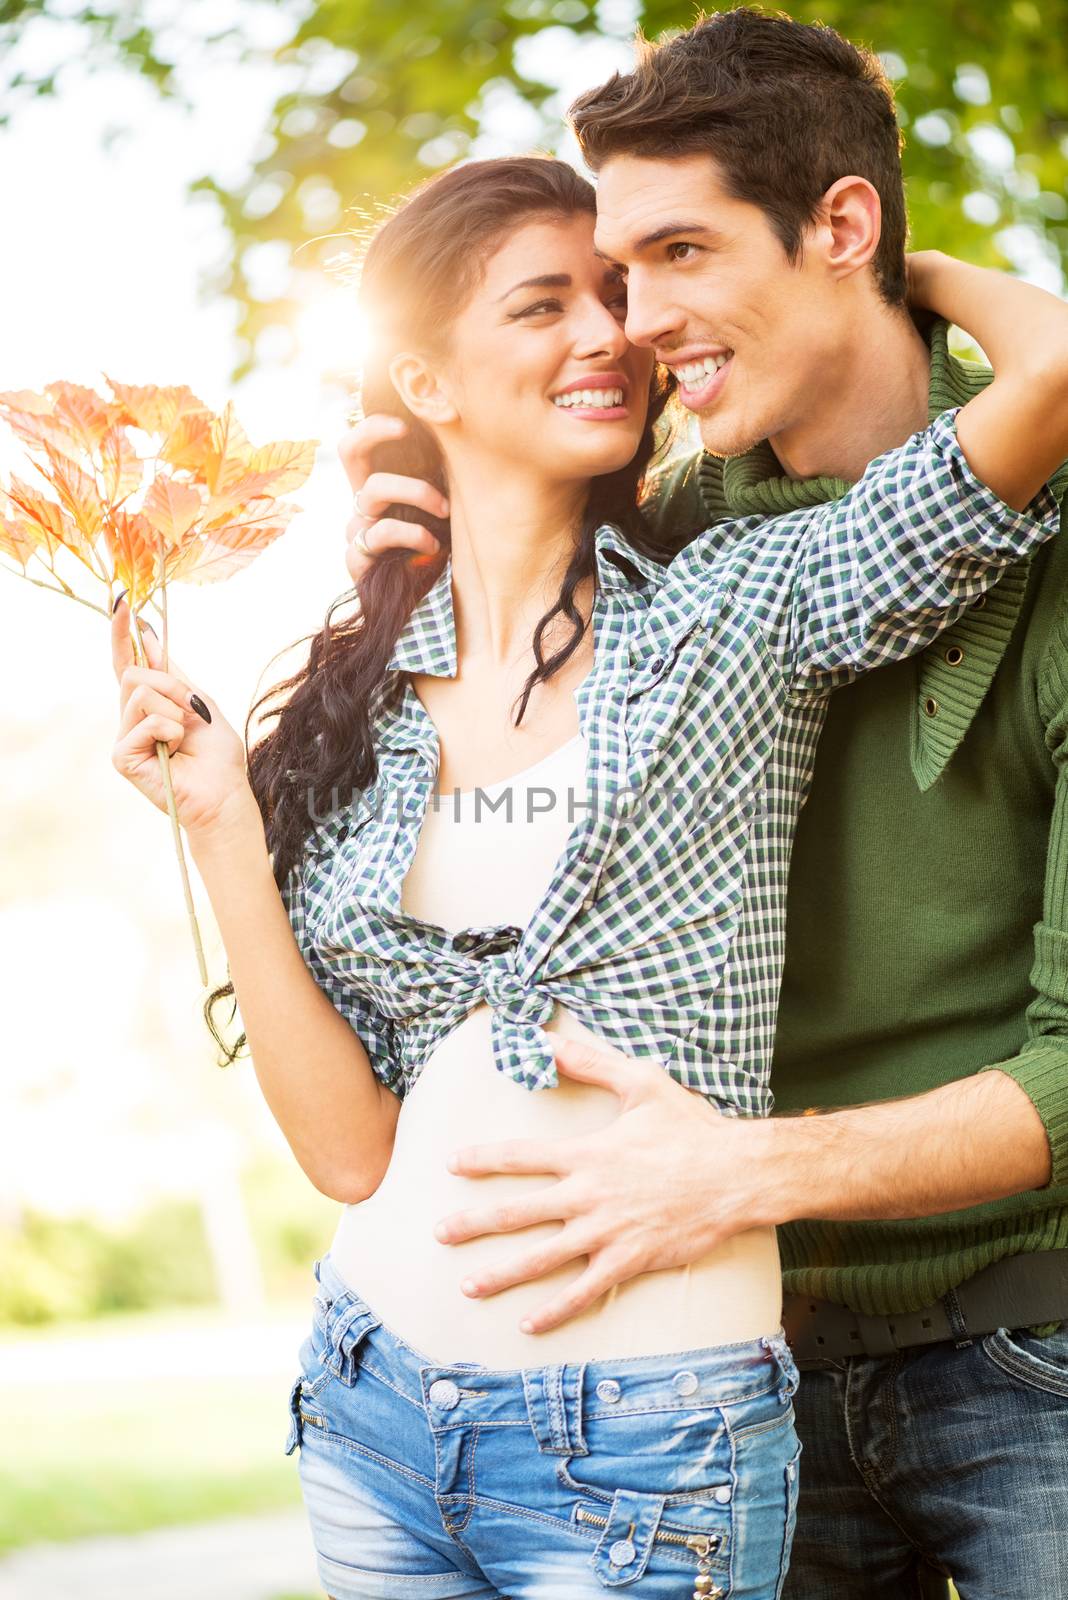 Young love couple in the park are embraced, a girl carries sprig of autumn leaves.